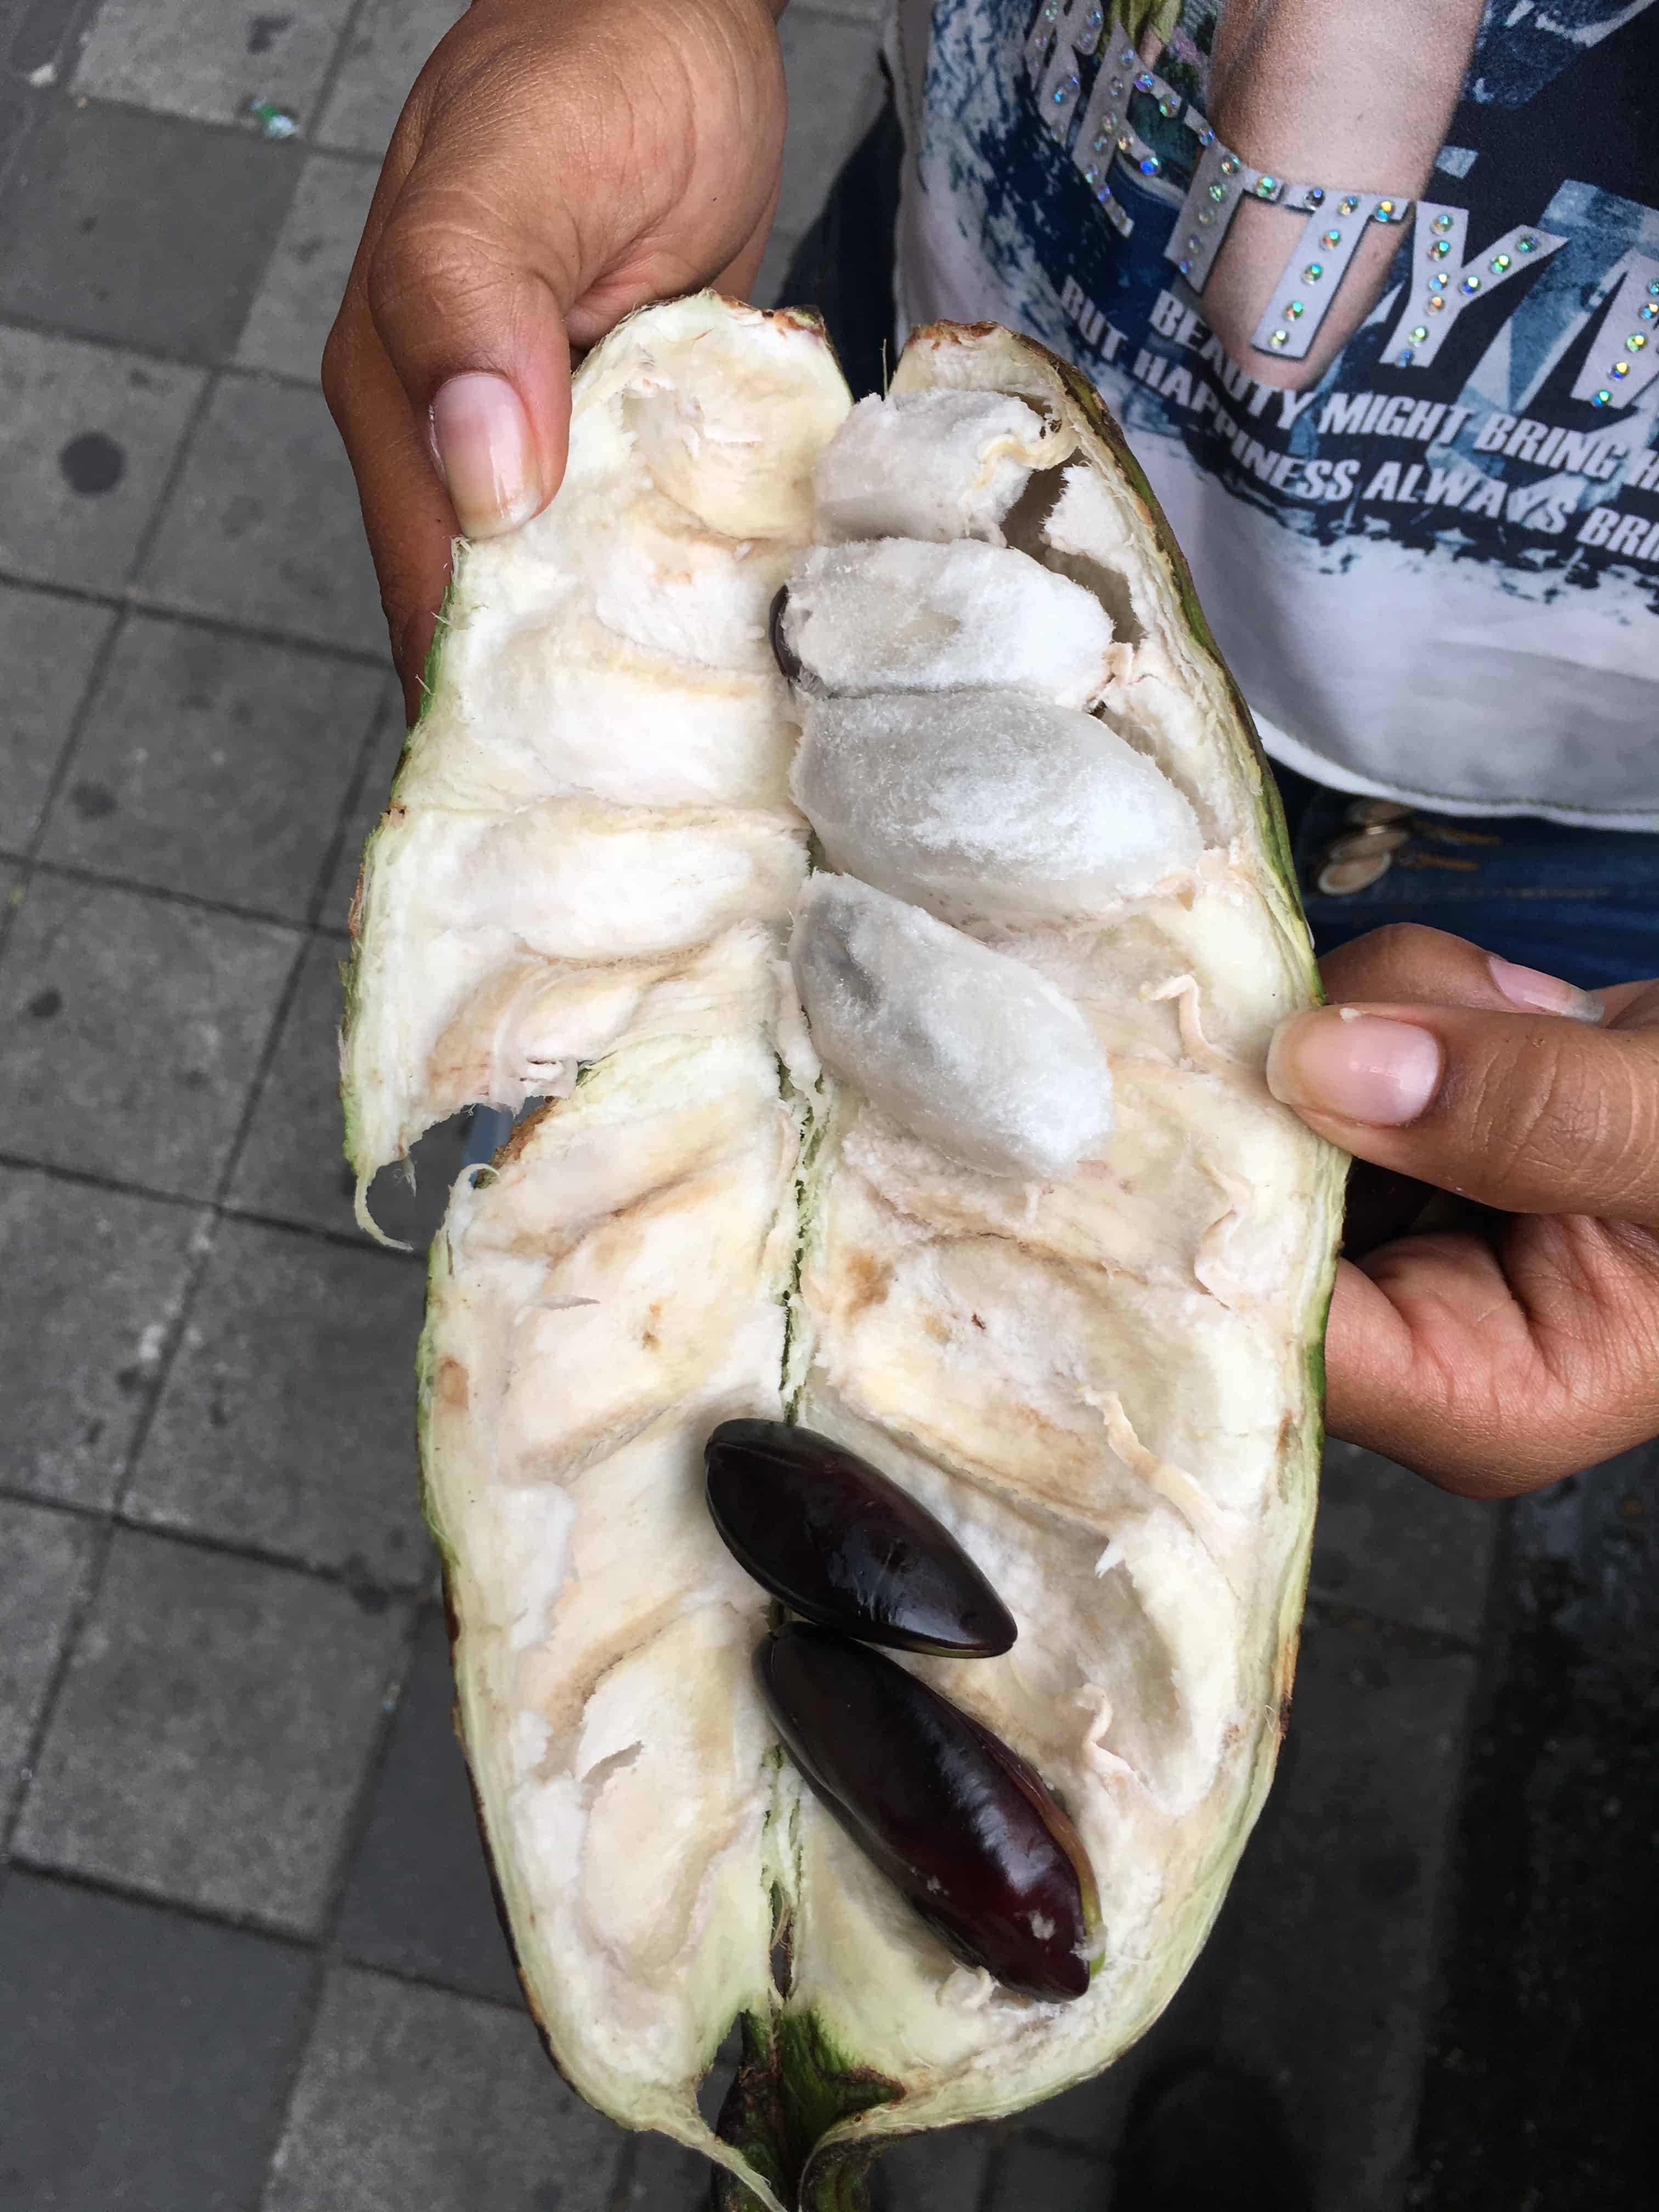 Fruit in Colombia